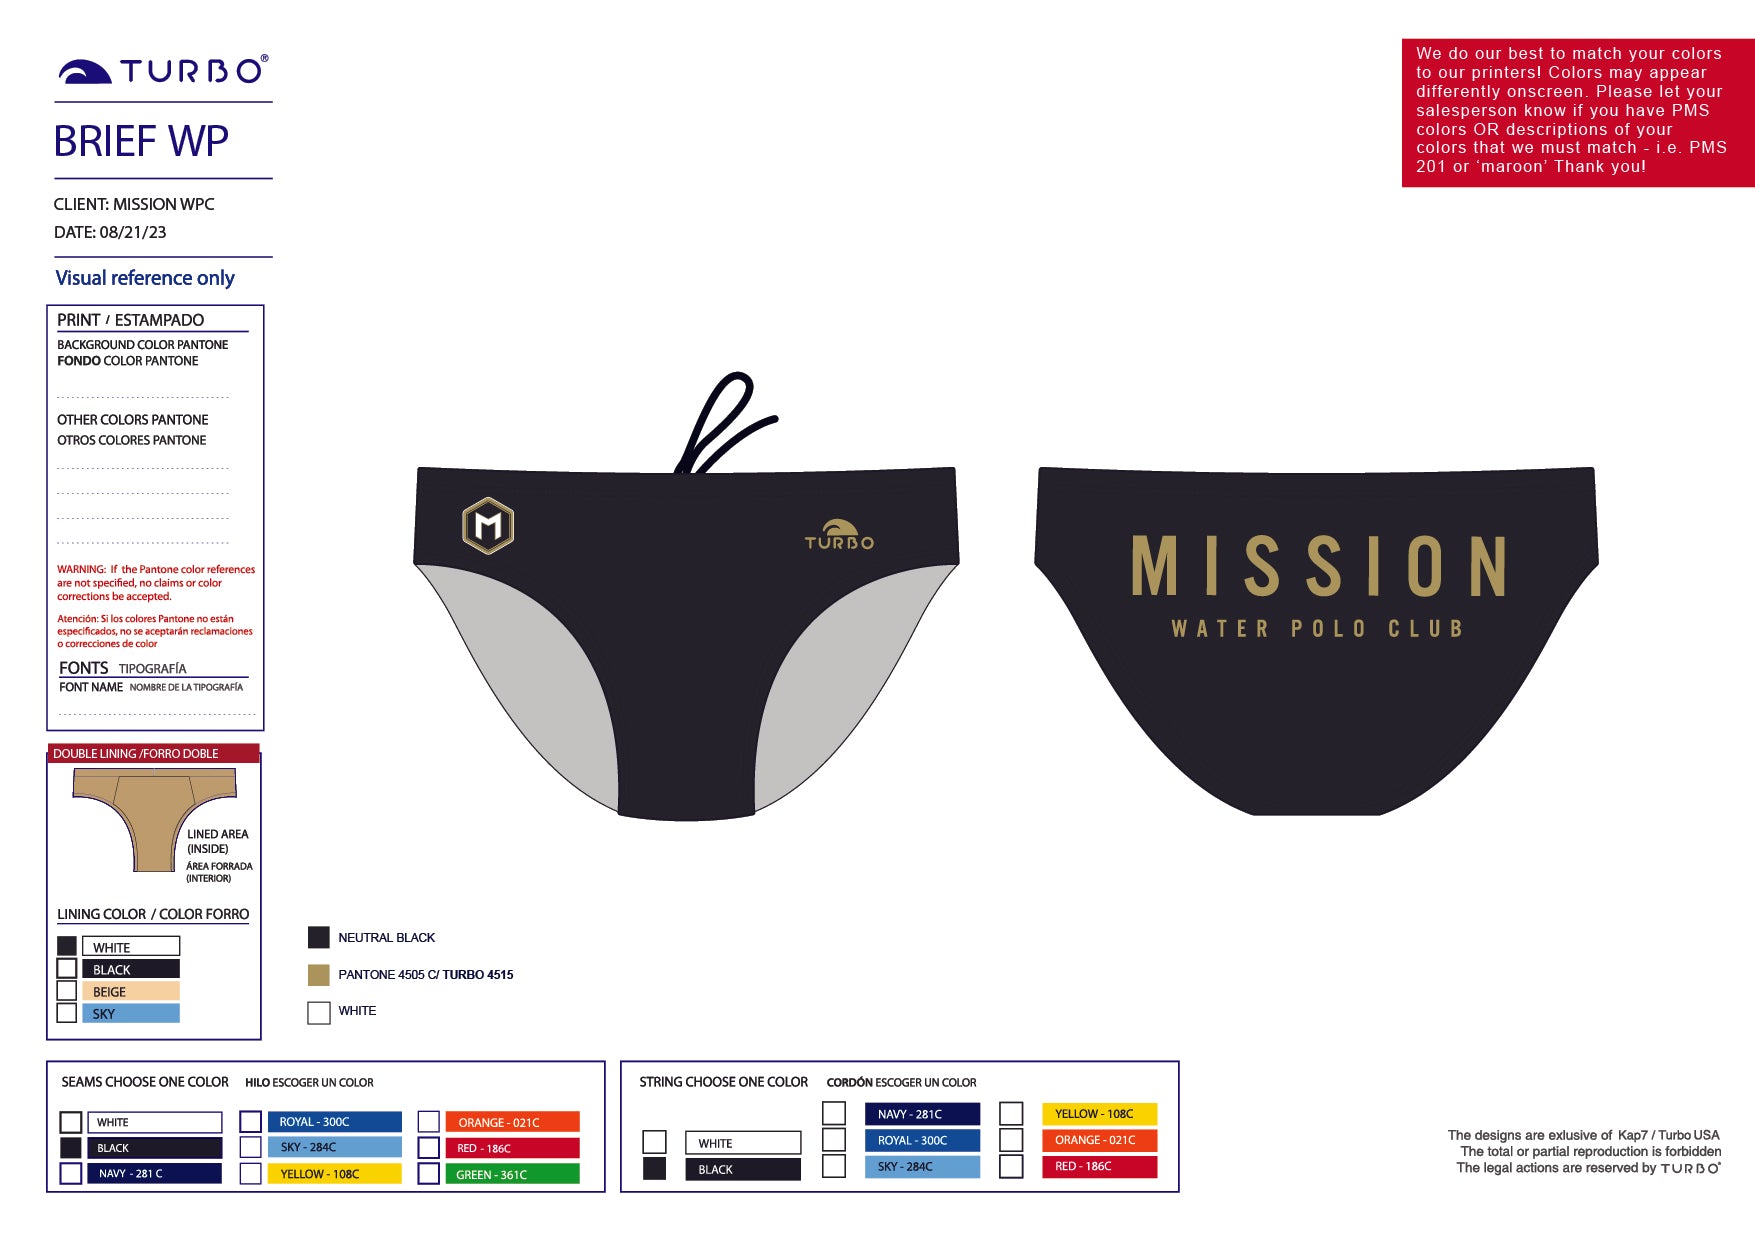 Mission Water Polo Men's Turbo